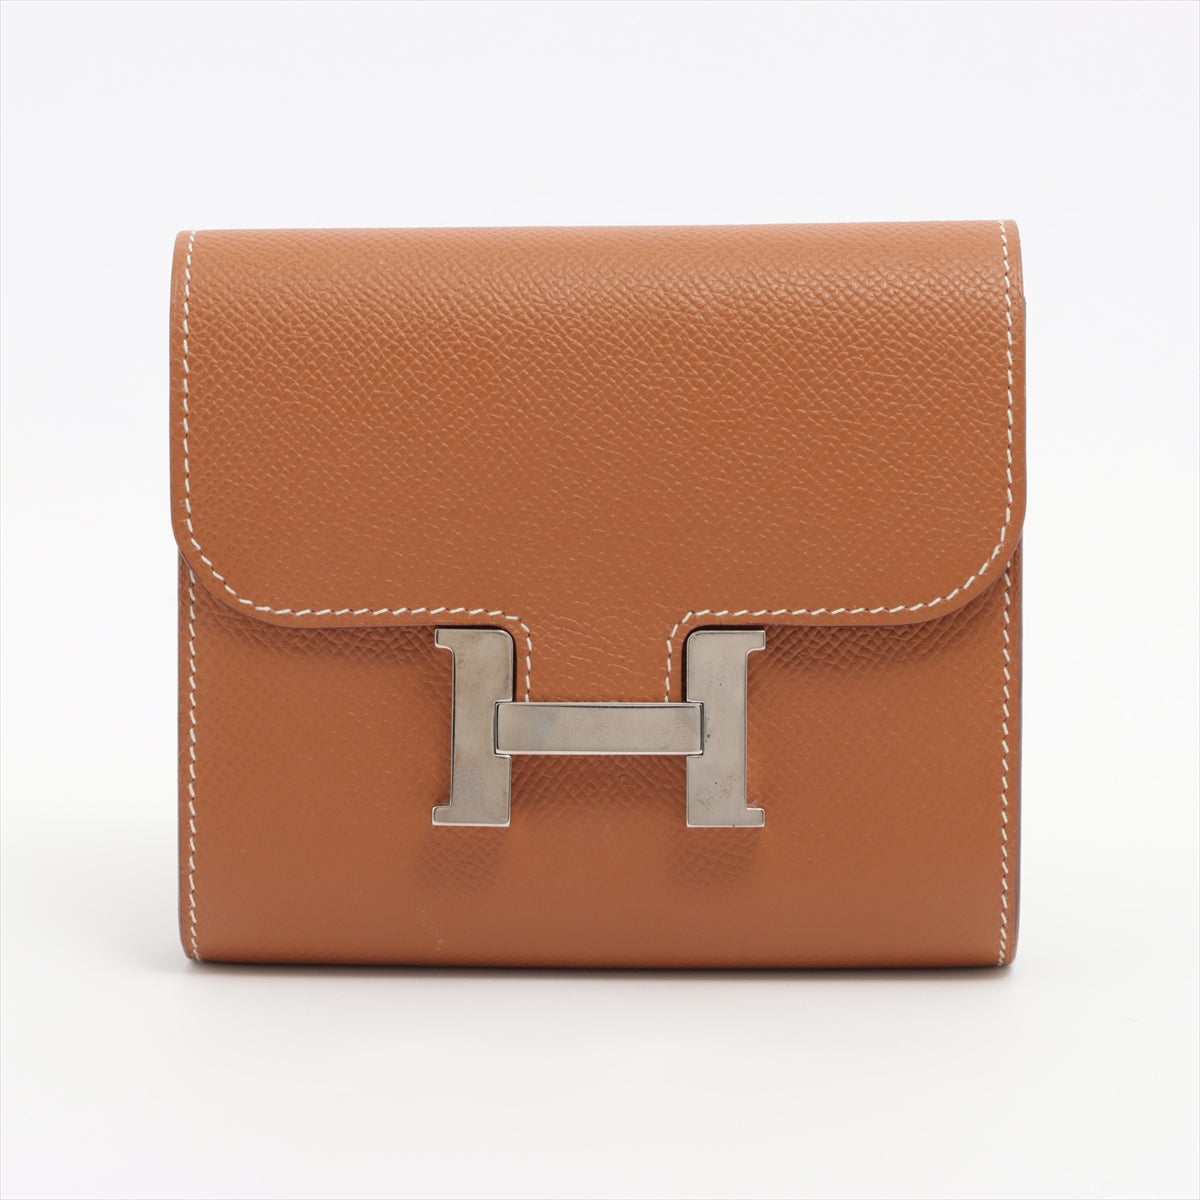 Hermès Constance Compact Veau Epsom Compact Wallet Gold Silver Metal fittings □N:2010